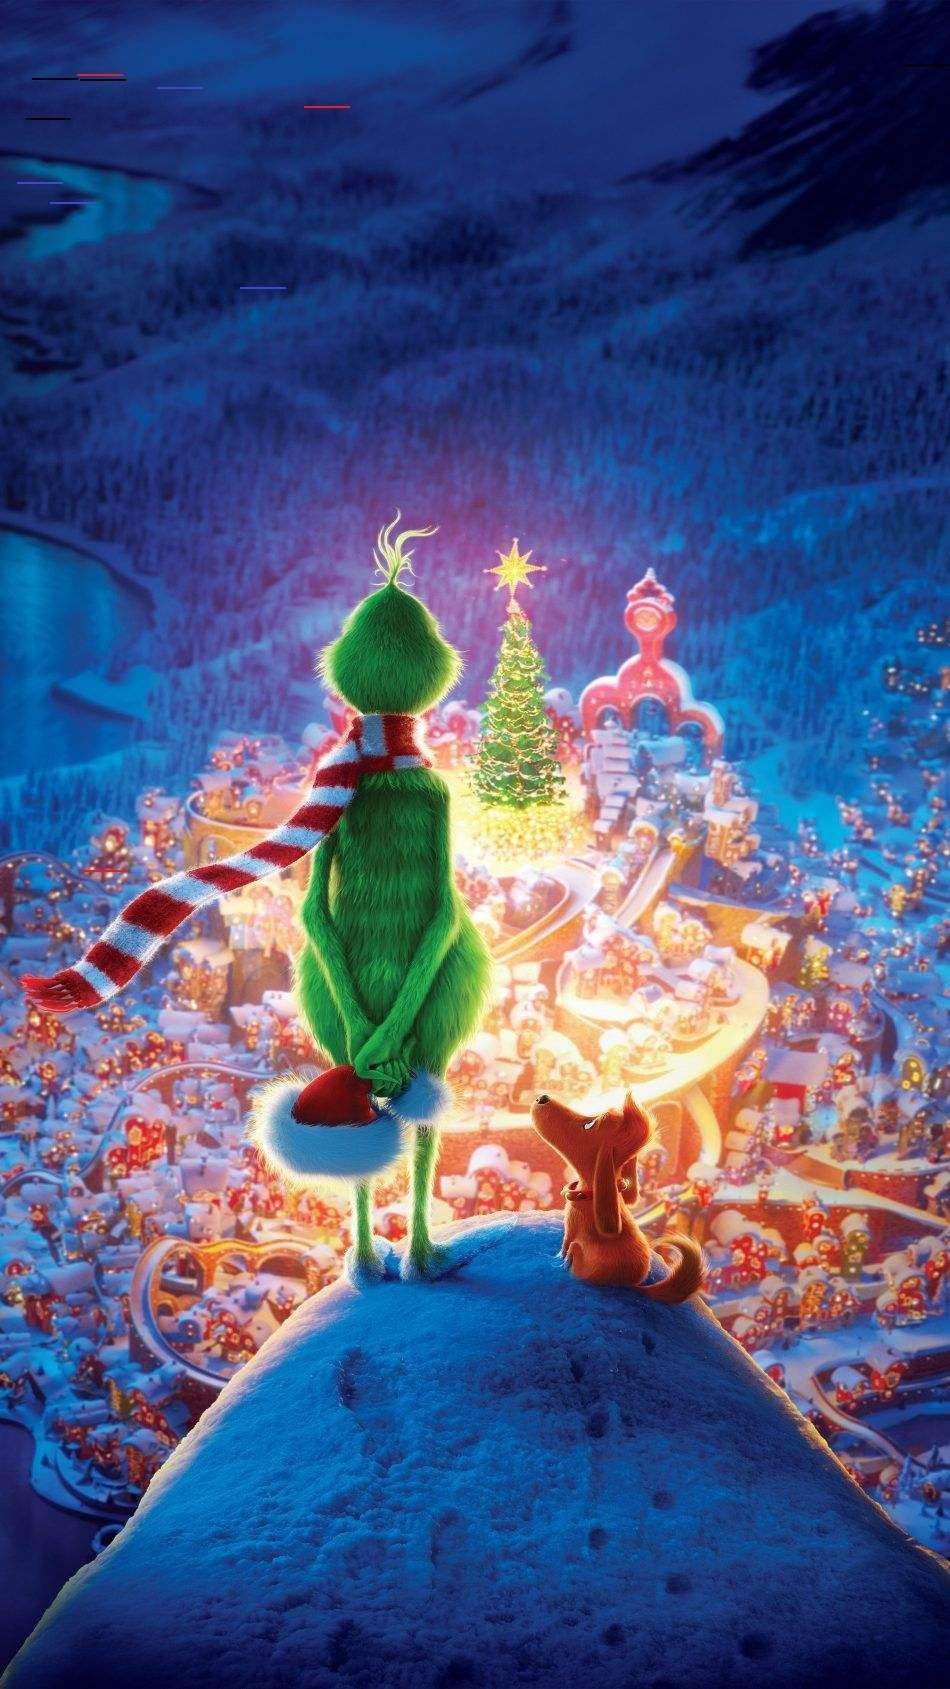 Download The Grinch Animation 2018 Free Pure 4K Ultra HD Mobile Wallpaper Get you. Cute christmas wallpaper, Christmas phone wallpaper, Wallpaper iphone christmas